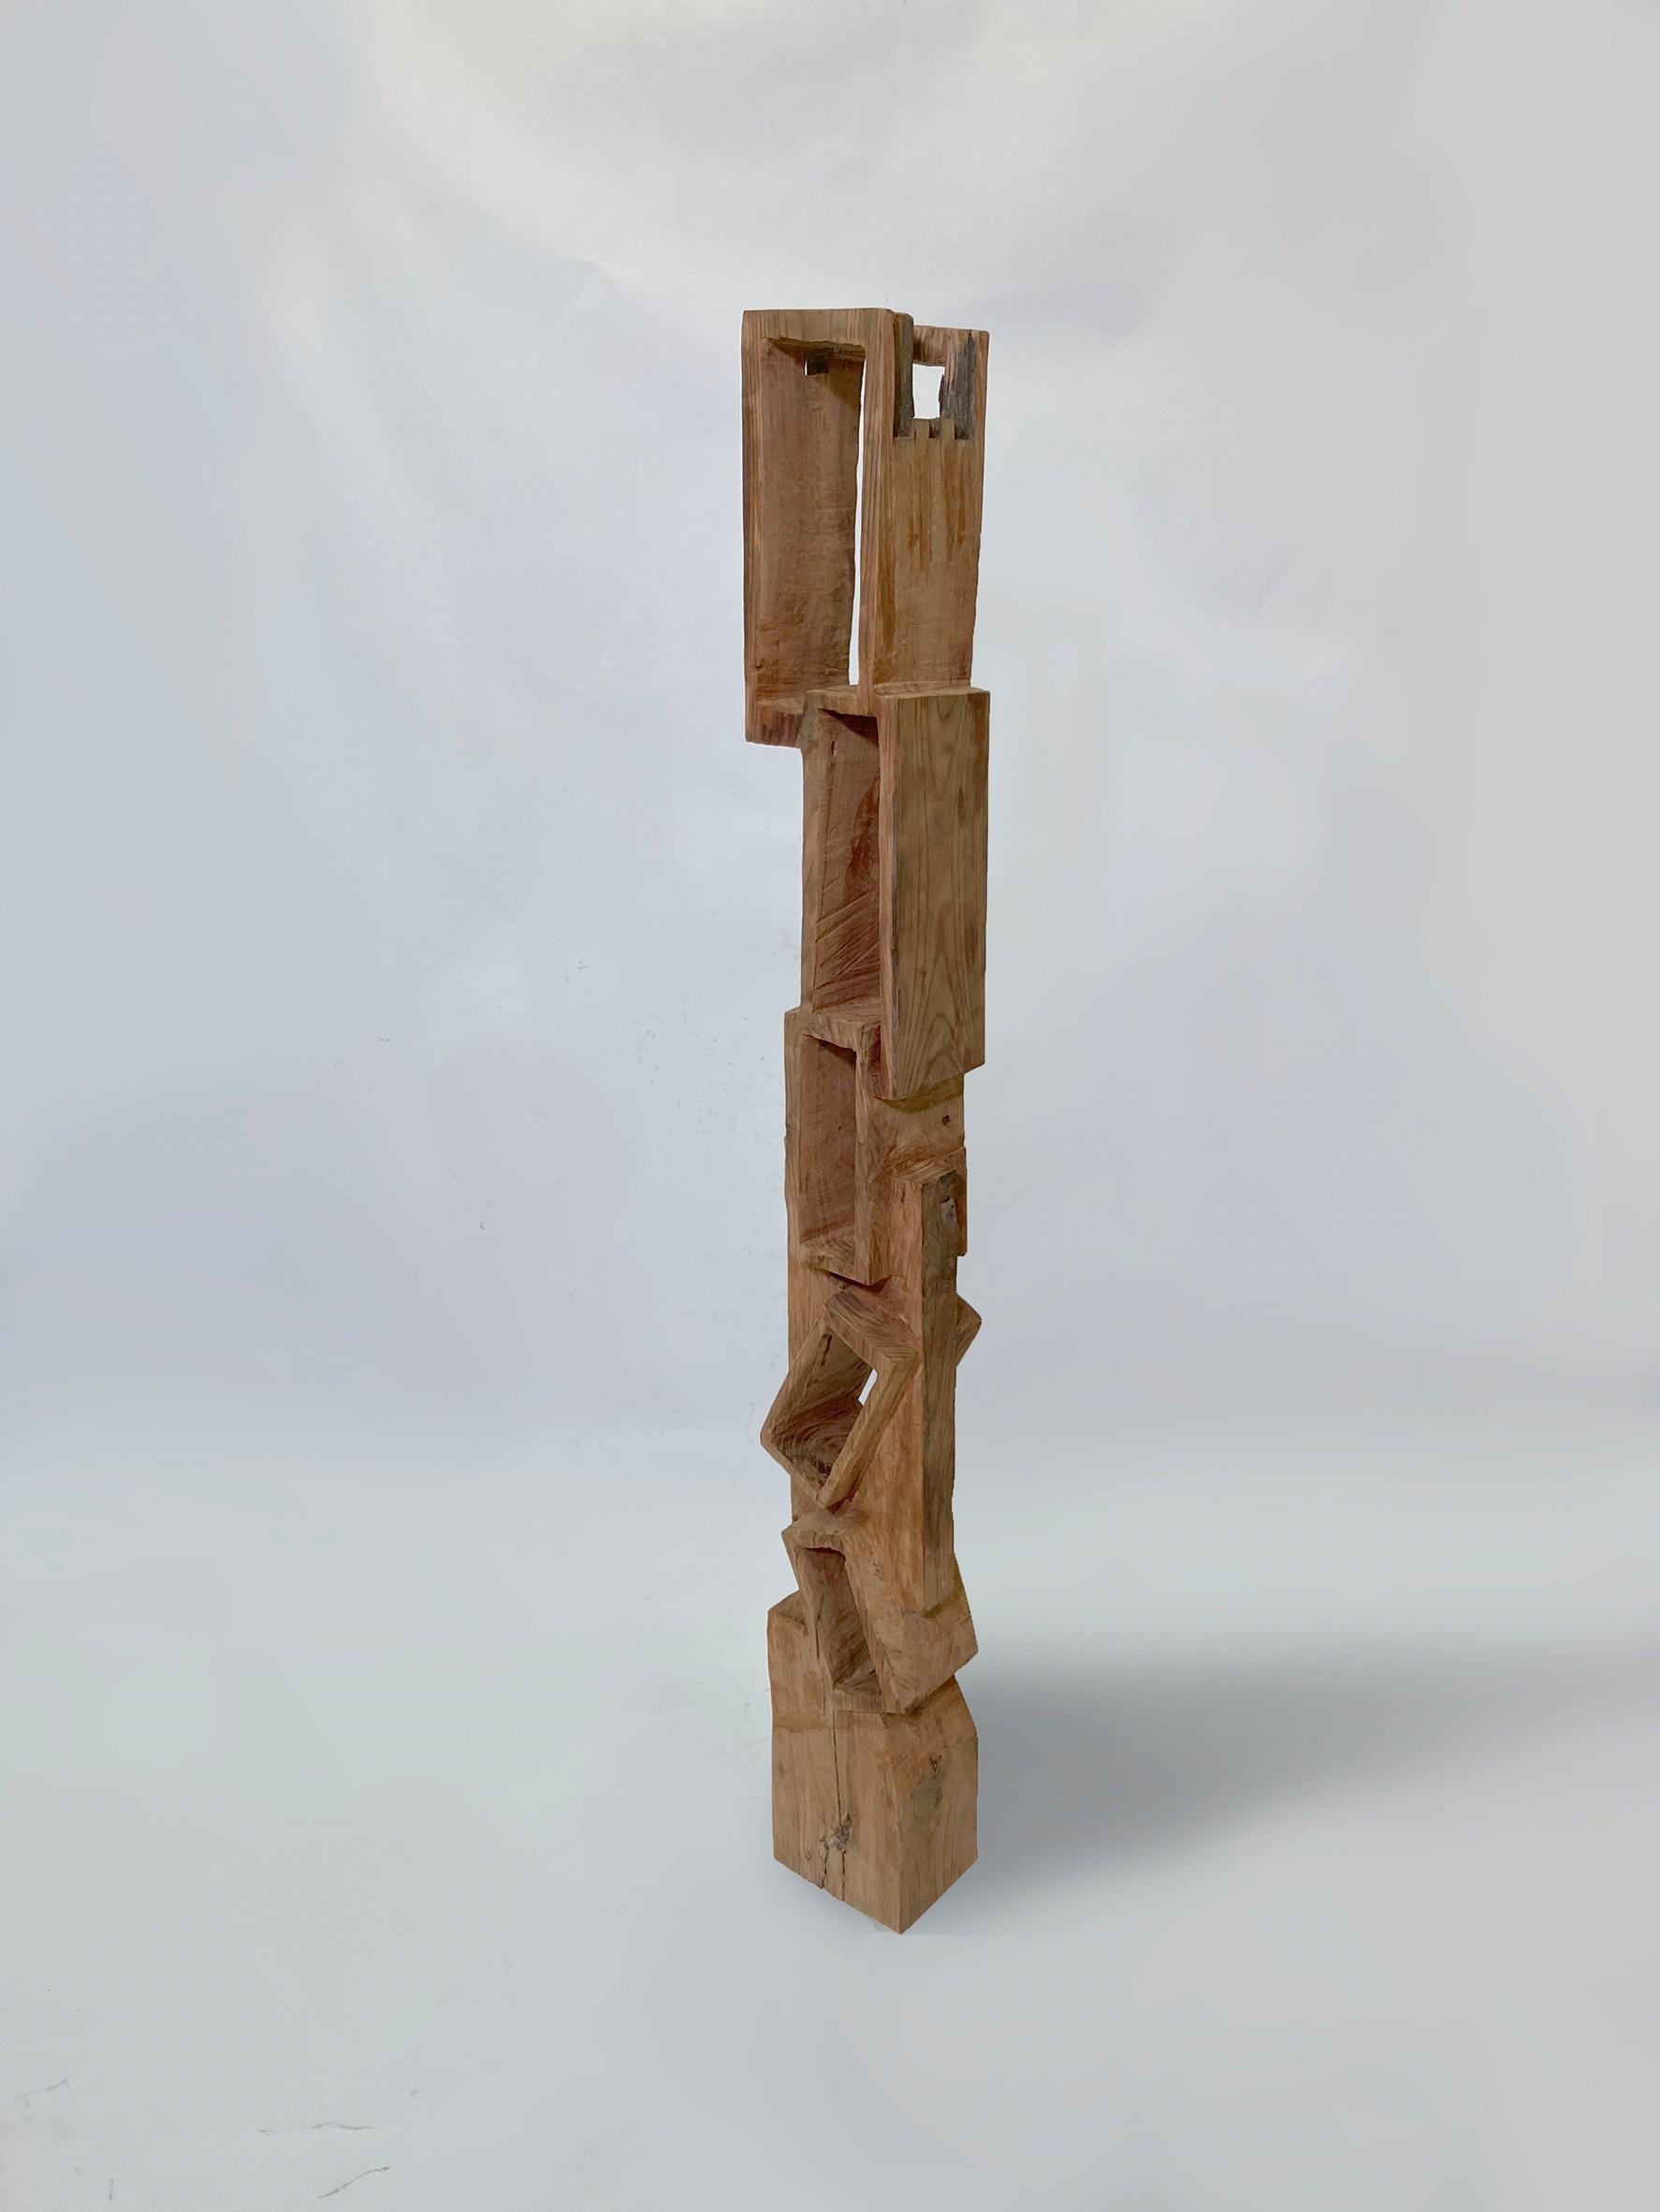 Japanese Hiroyuki Nishimura Abstract Sculpture Masouleh Tower02 Tribal Style Bookcase For Sale